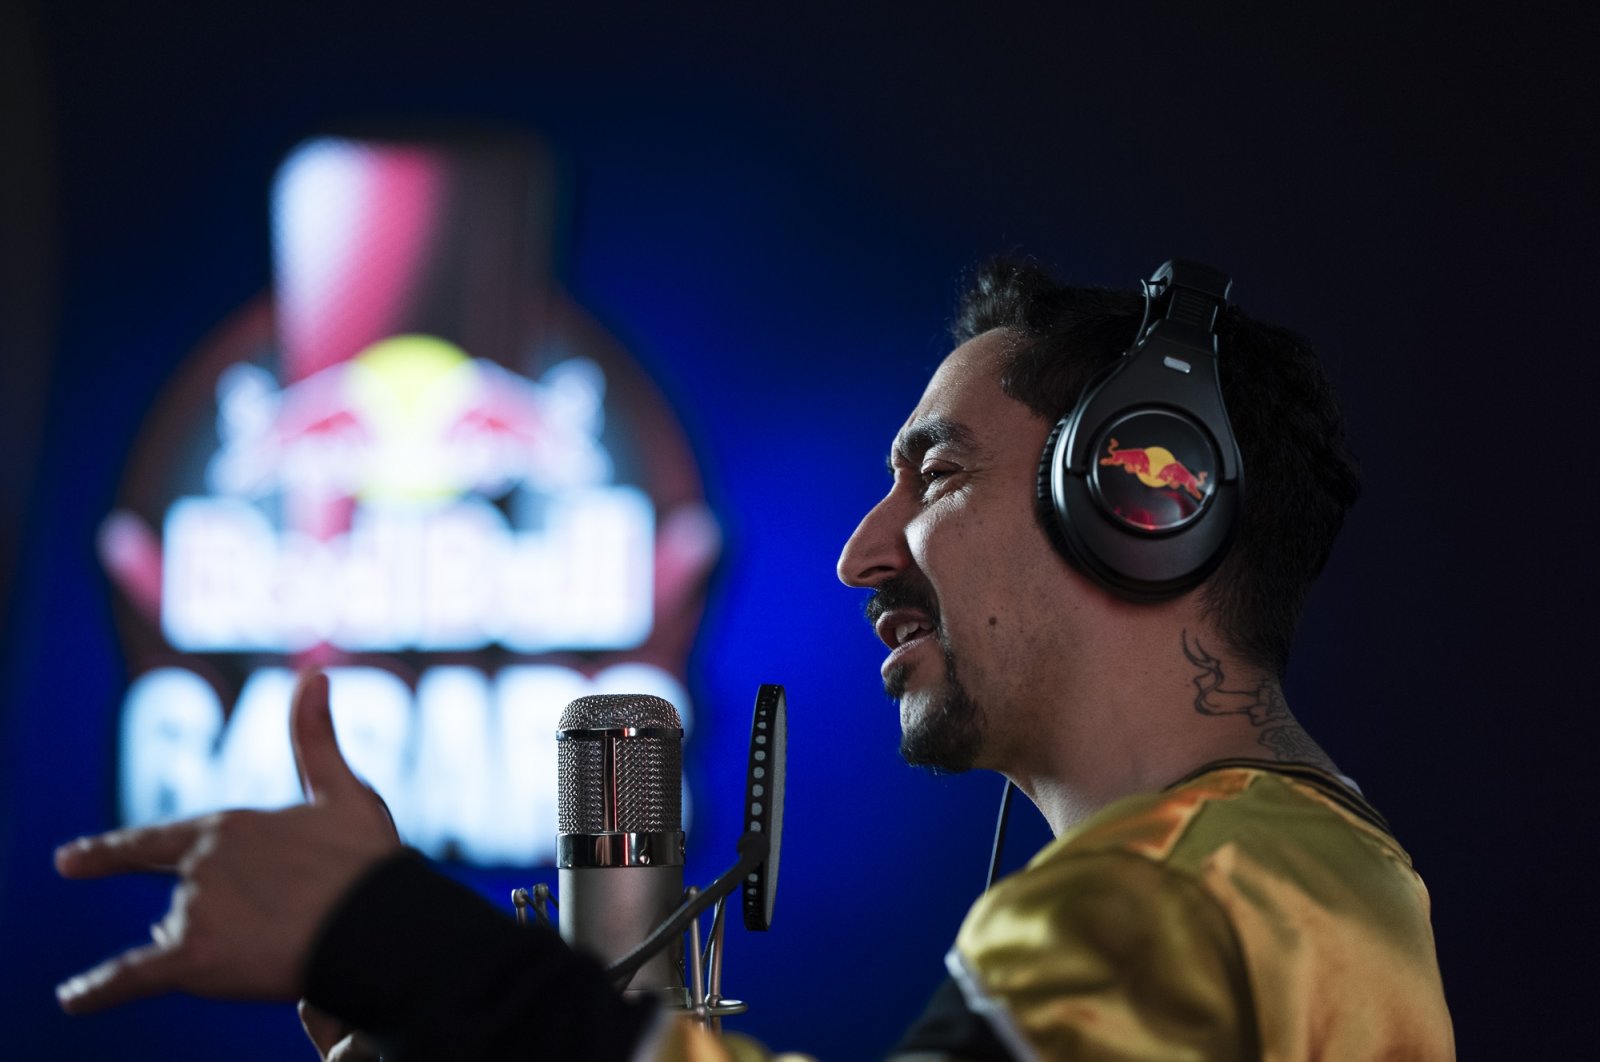 Eko Fresh, a long-standing name in the music world known for constantly surprising his audience, showcased his unique style and talent in this special episode, fully embracing the 64 Bars format. (Photo courtesy of Red Bull)